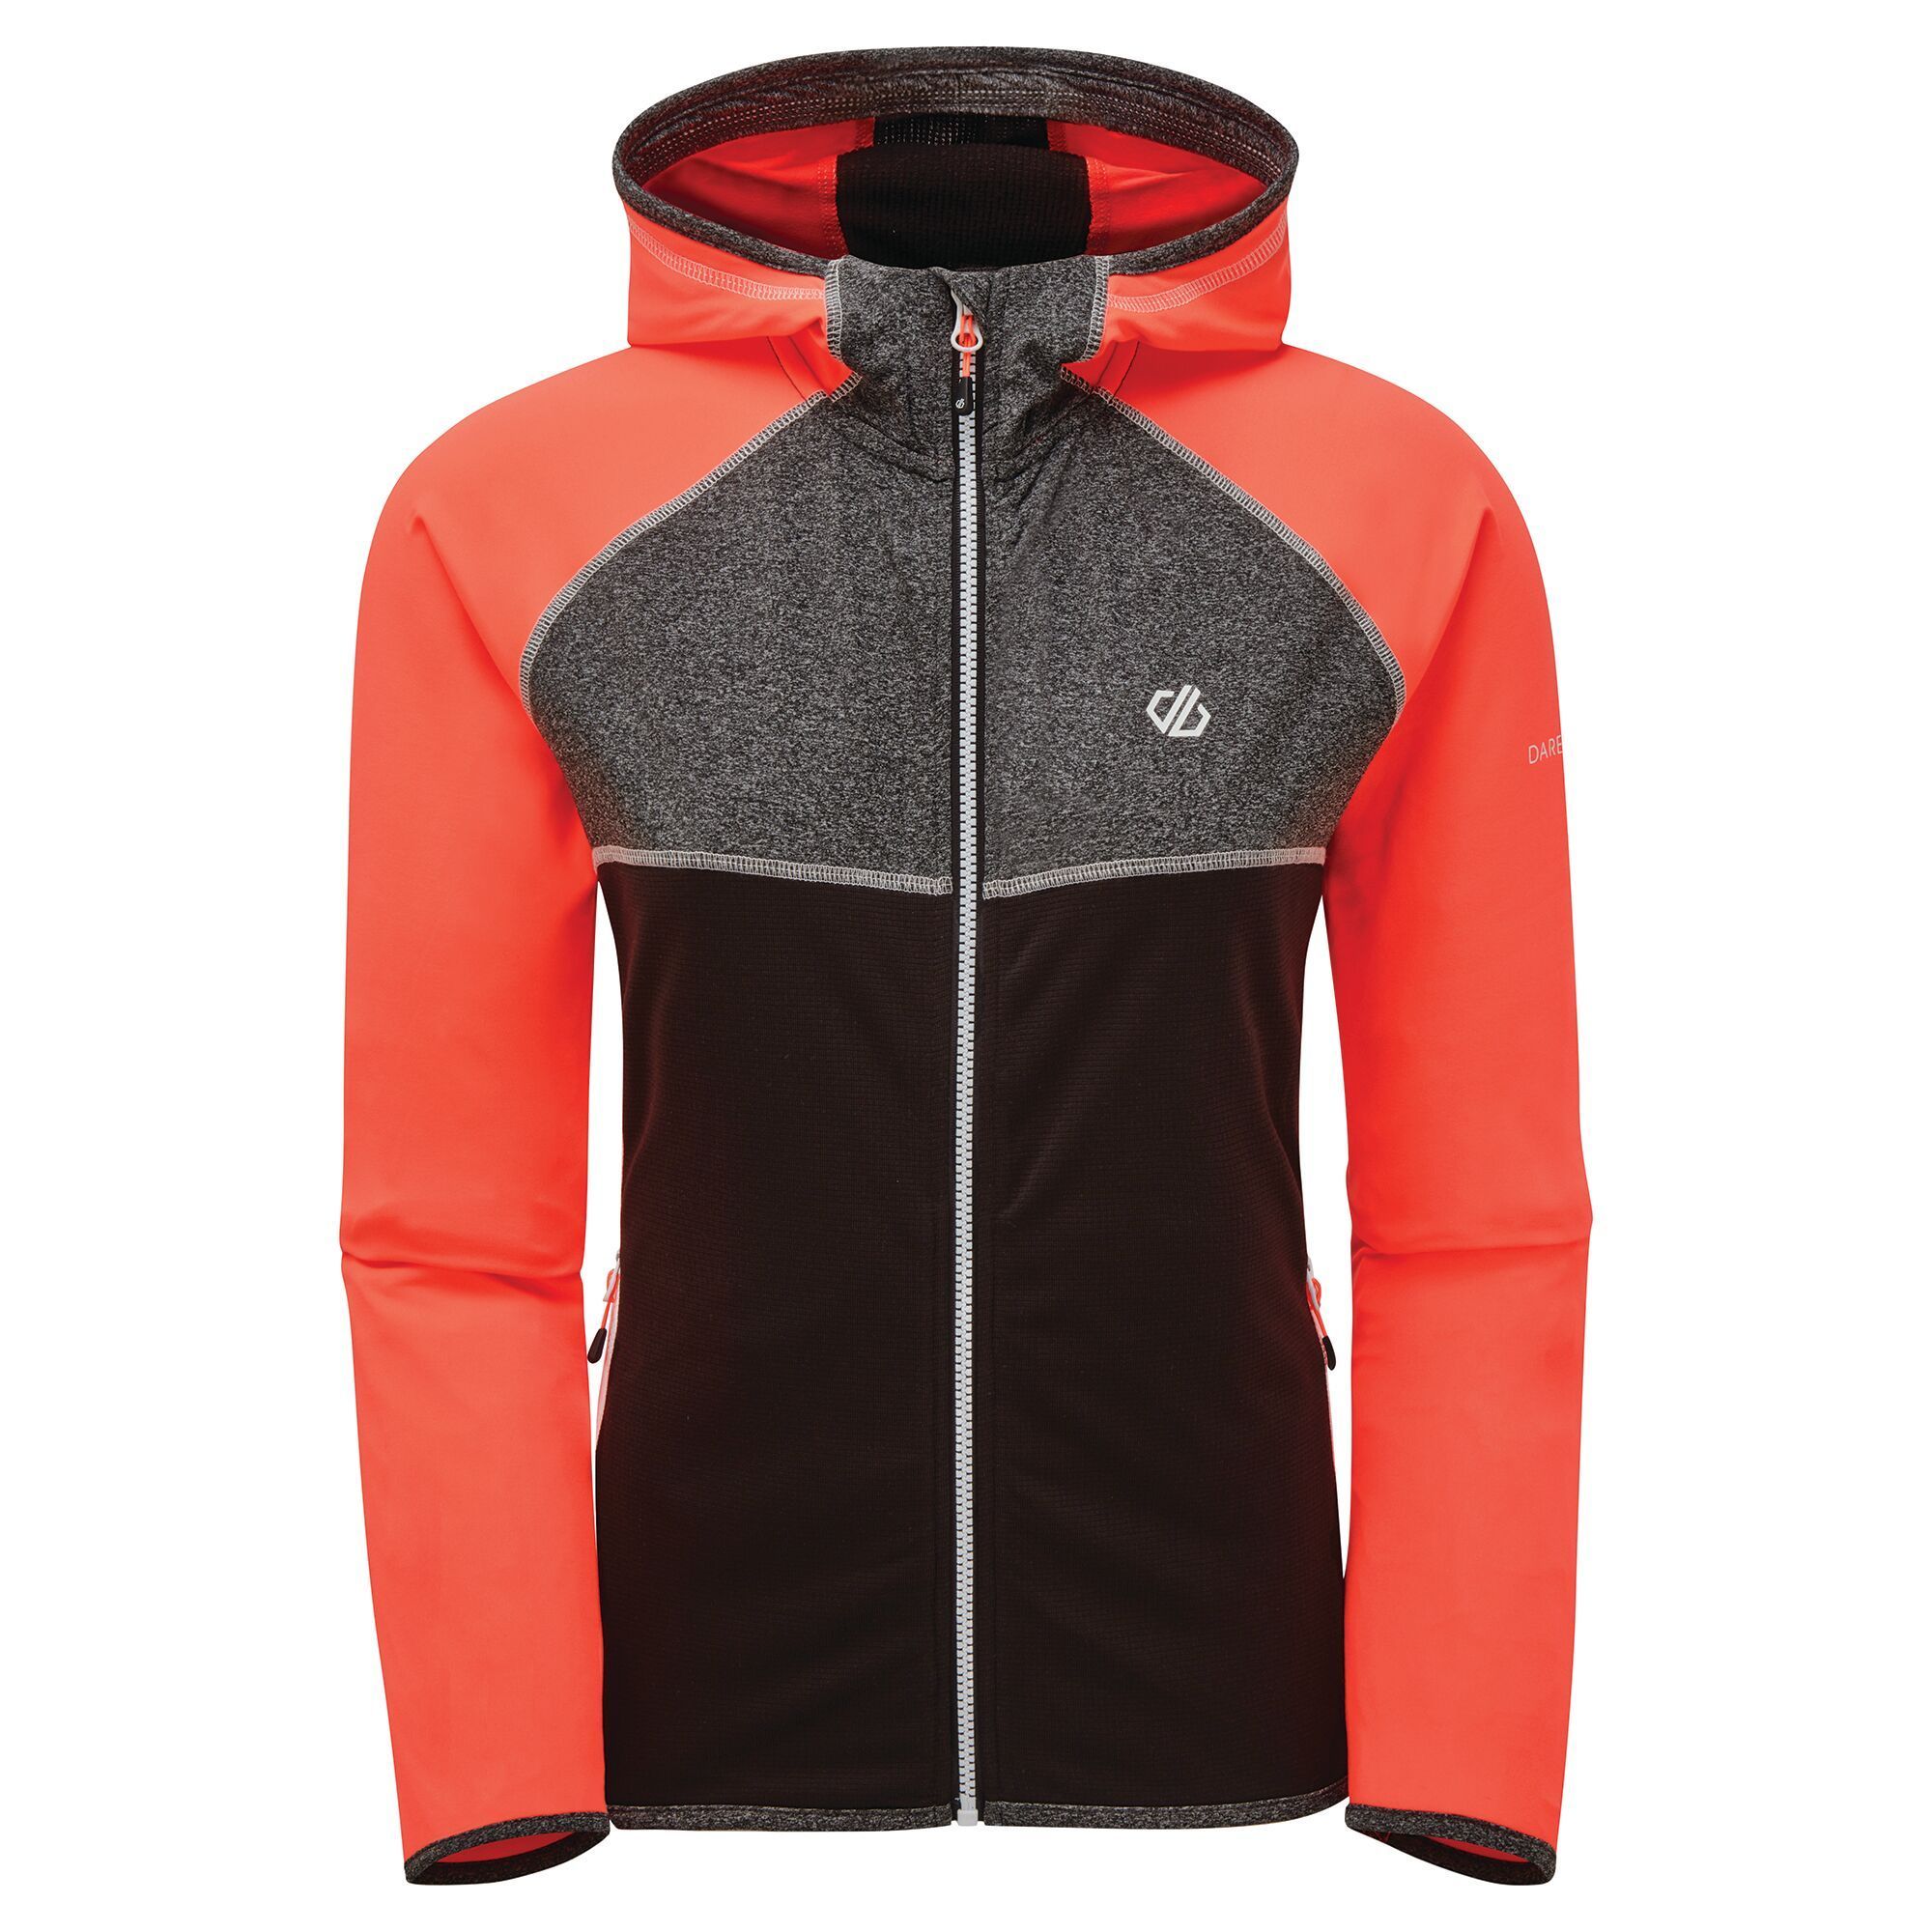 Material: 100% Polyester. Lightweight, stretch fabric hooded sweatshirt with full length zip. Stretch binding to hood opening, cuffs and hem. Inner zip and chin guard. 2 lower zip pockets.